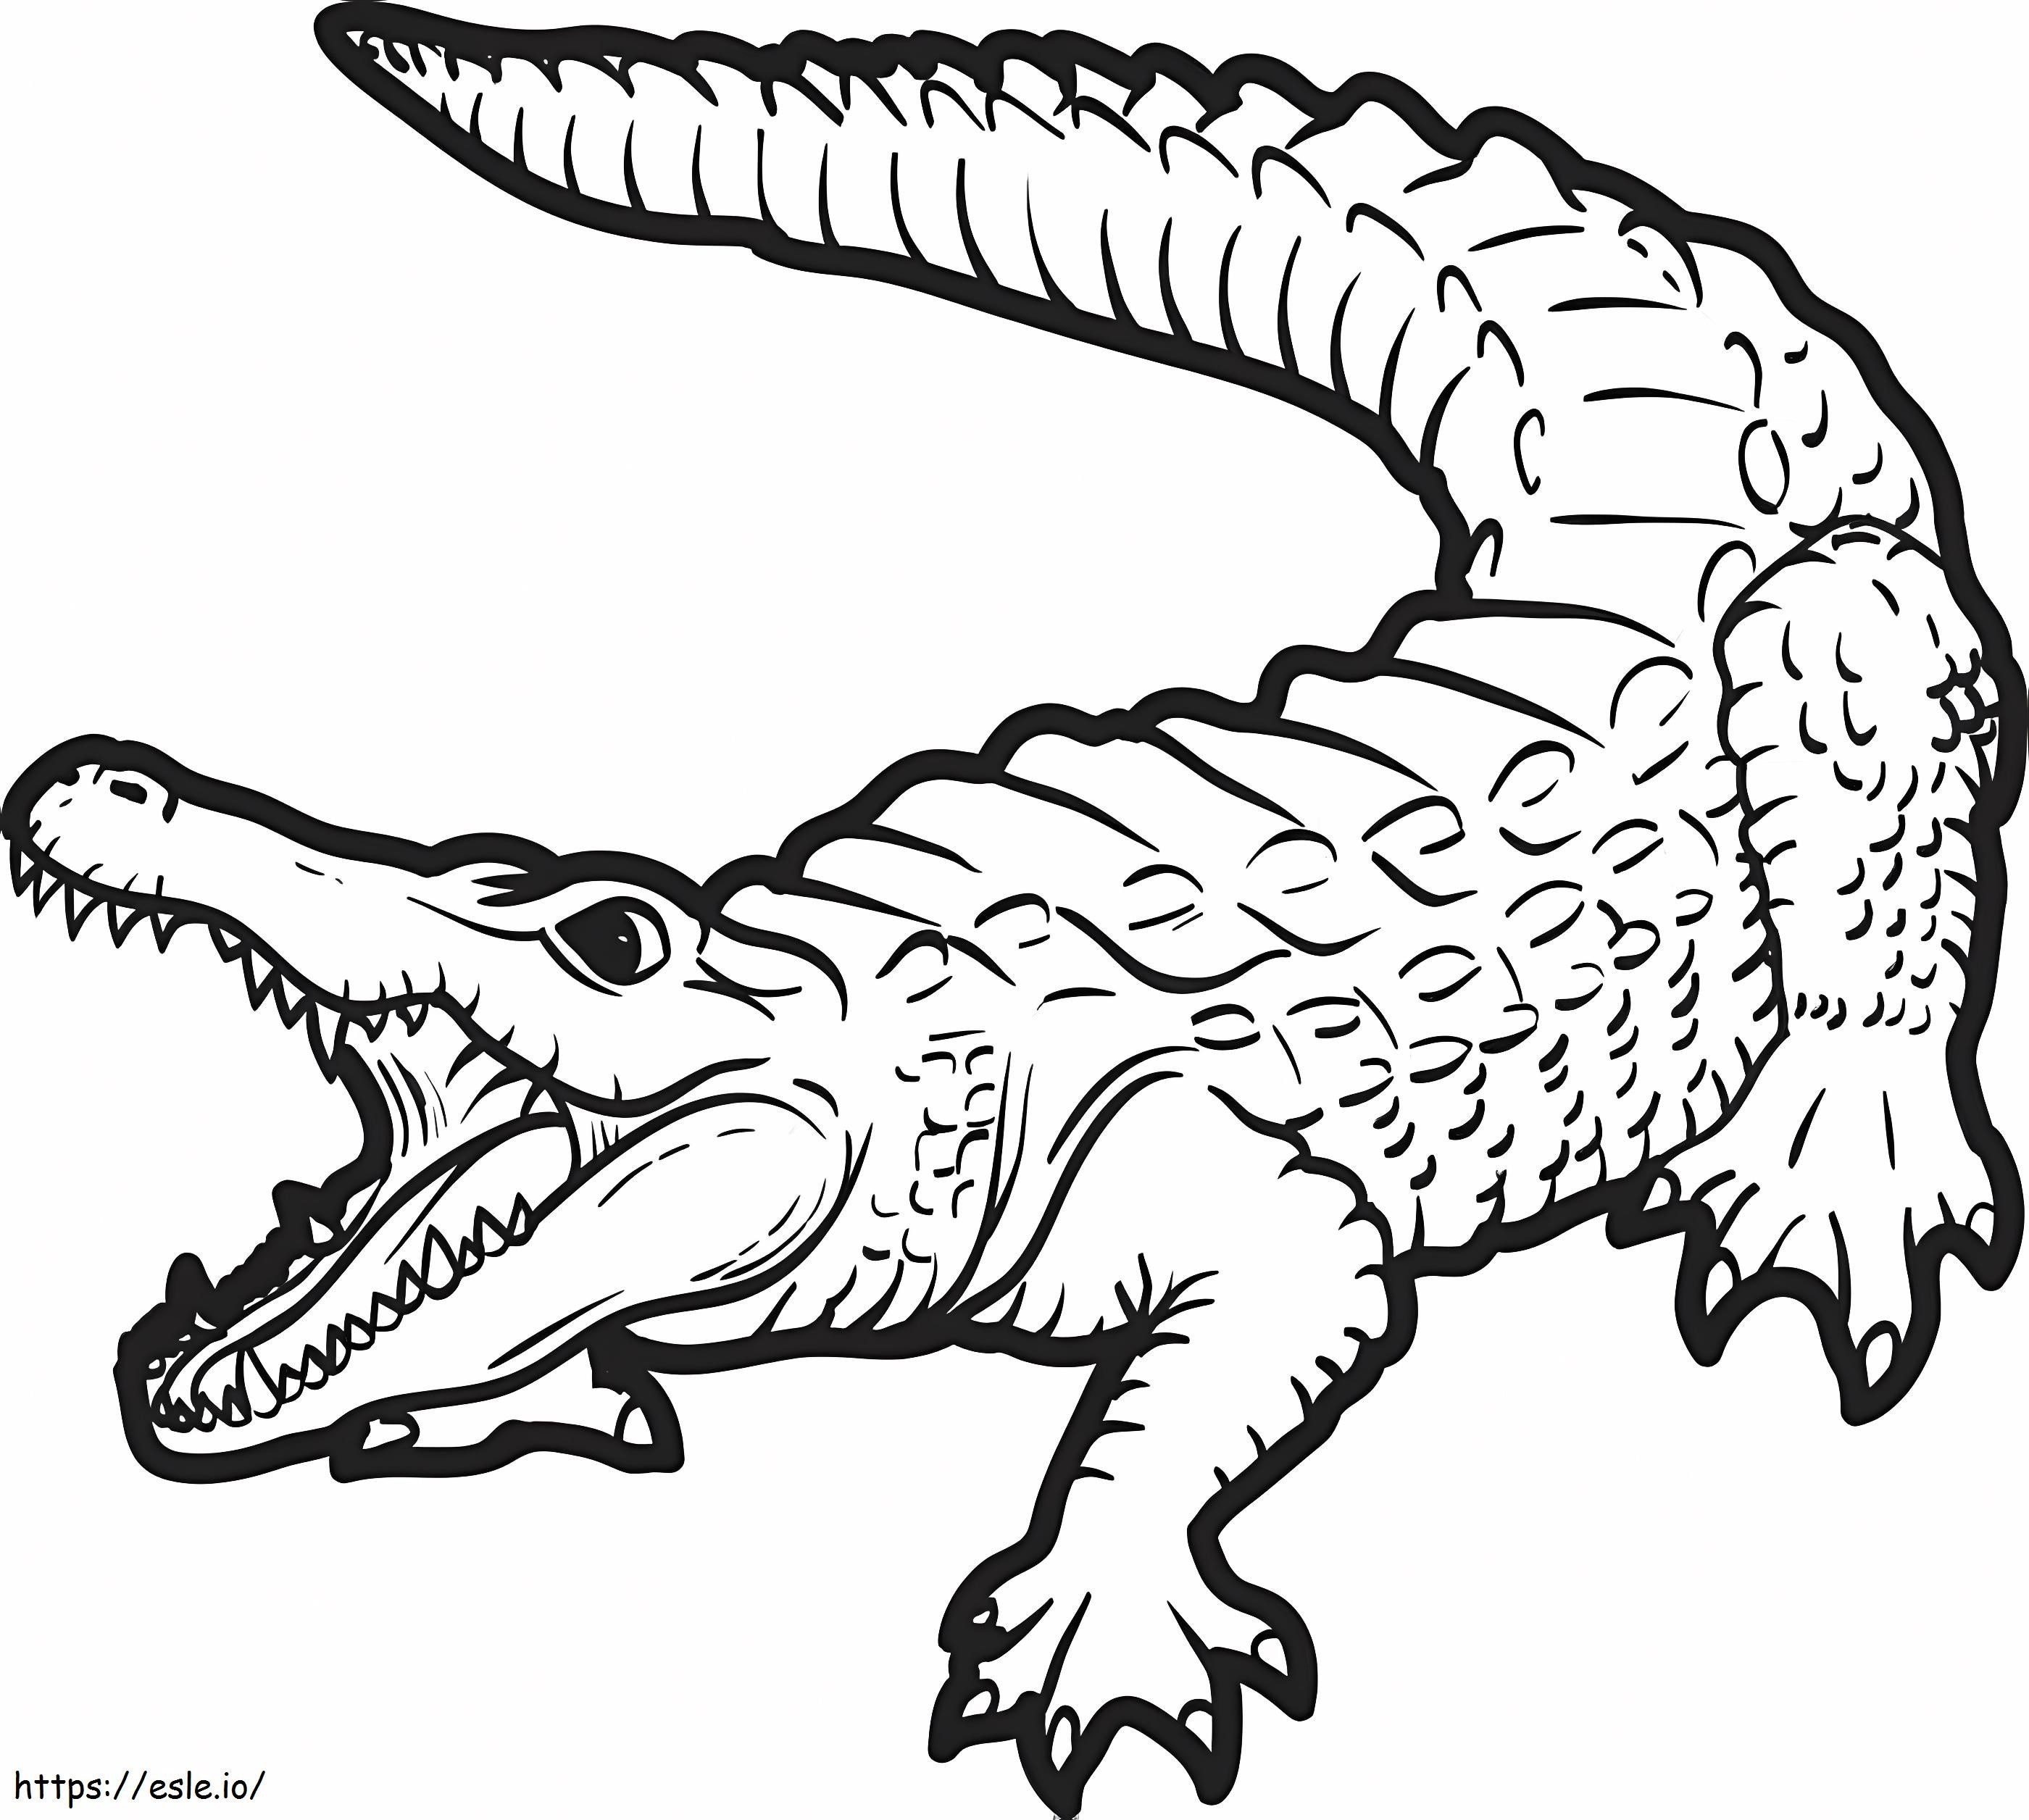 Alligator 1 coloring page